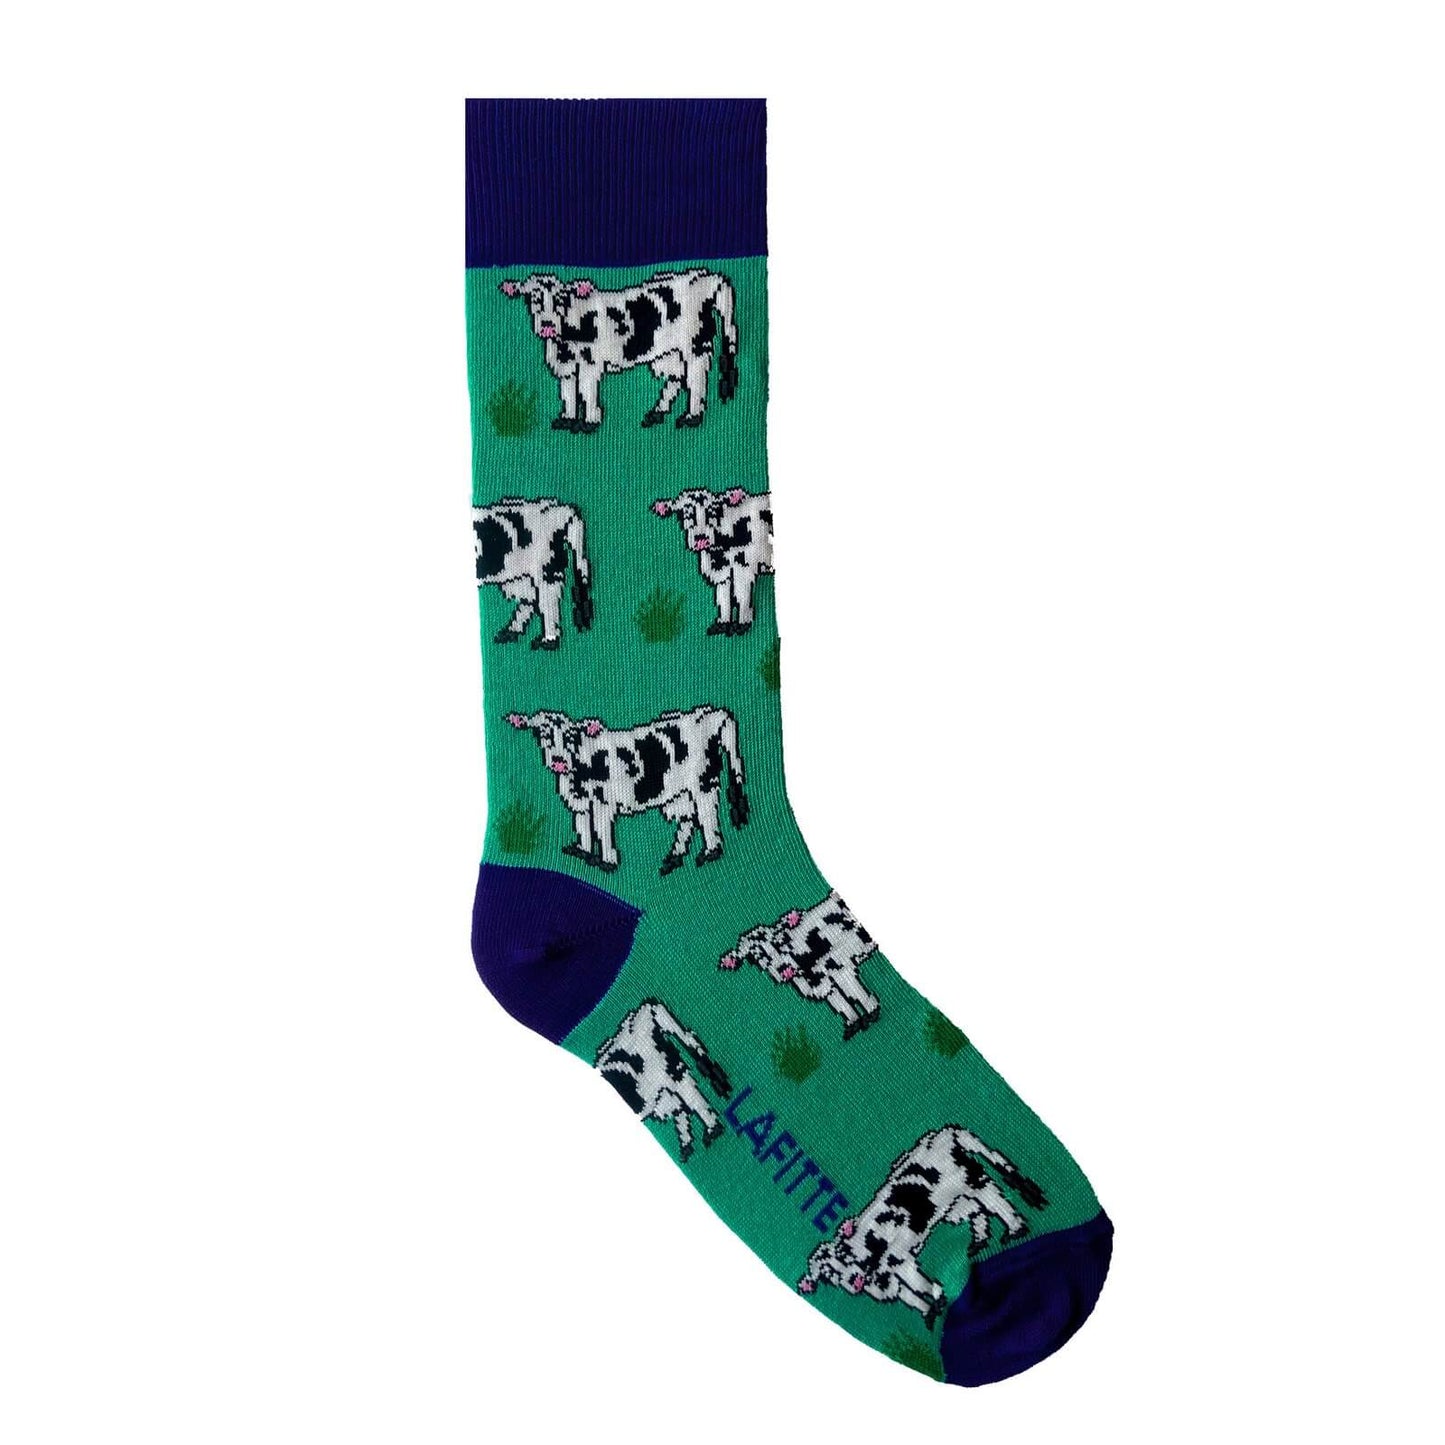 Australian made novelty socks. Colour is green with cows all over.